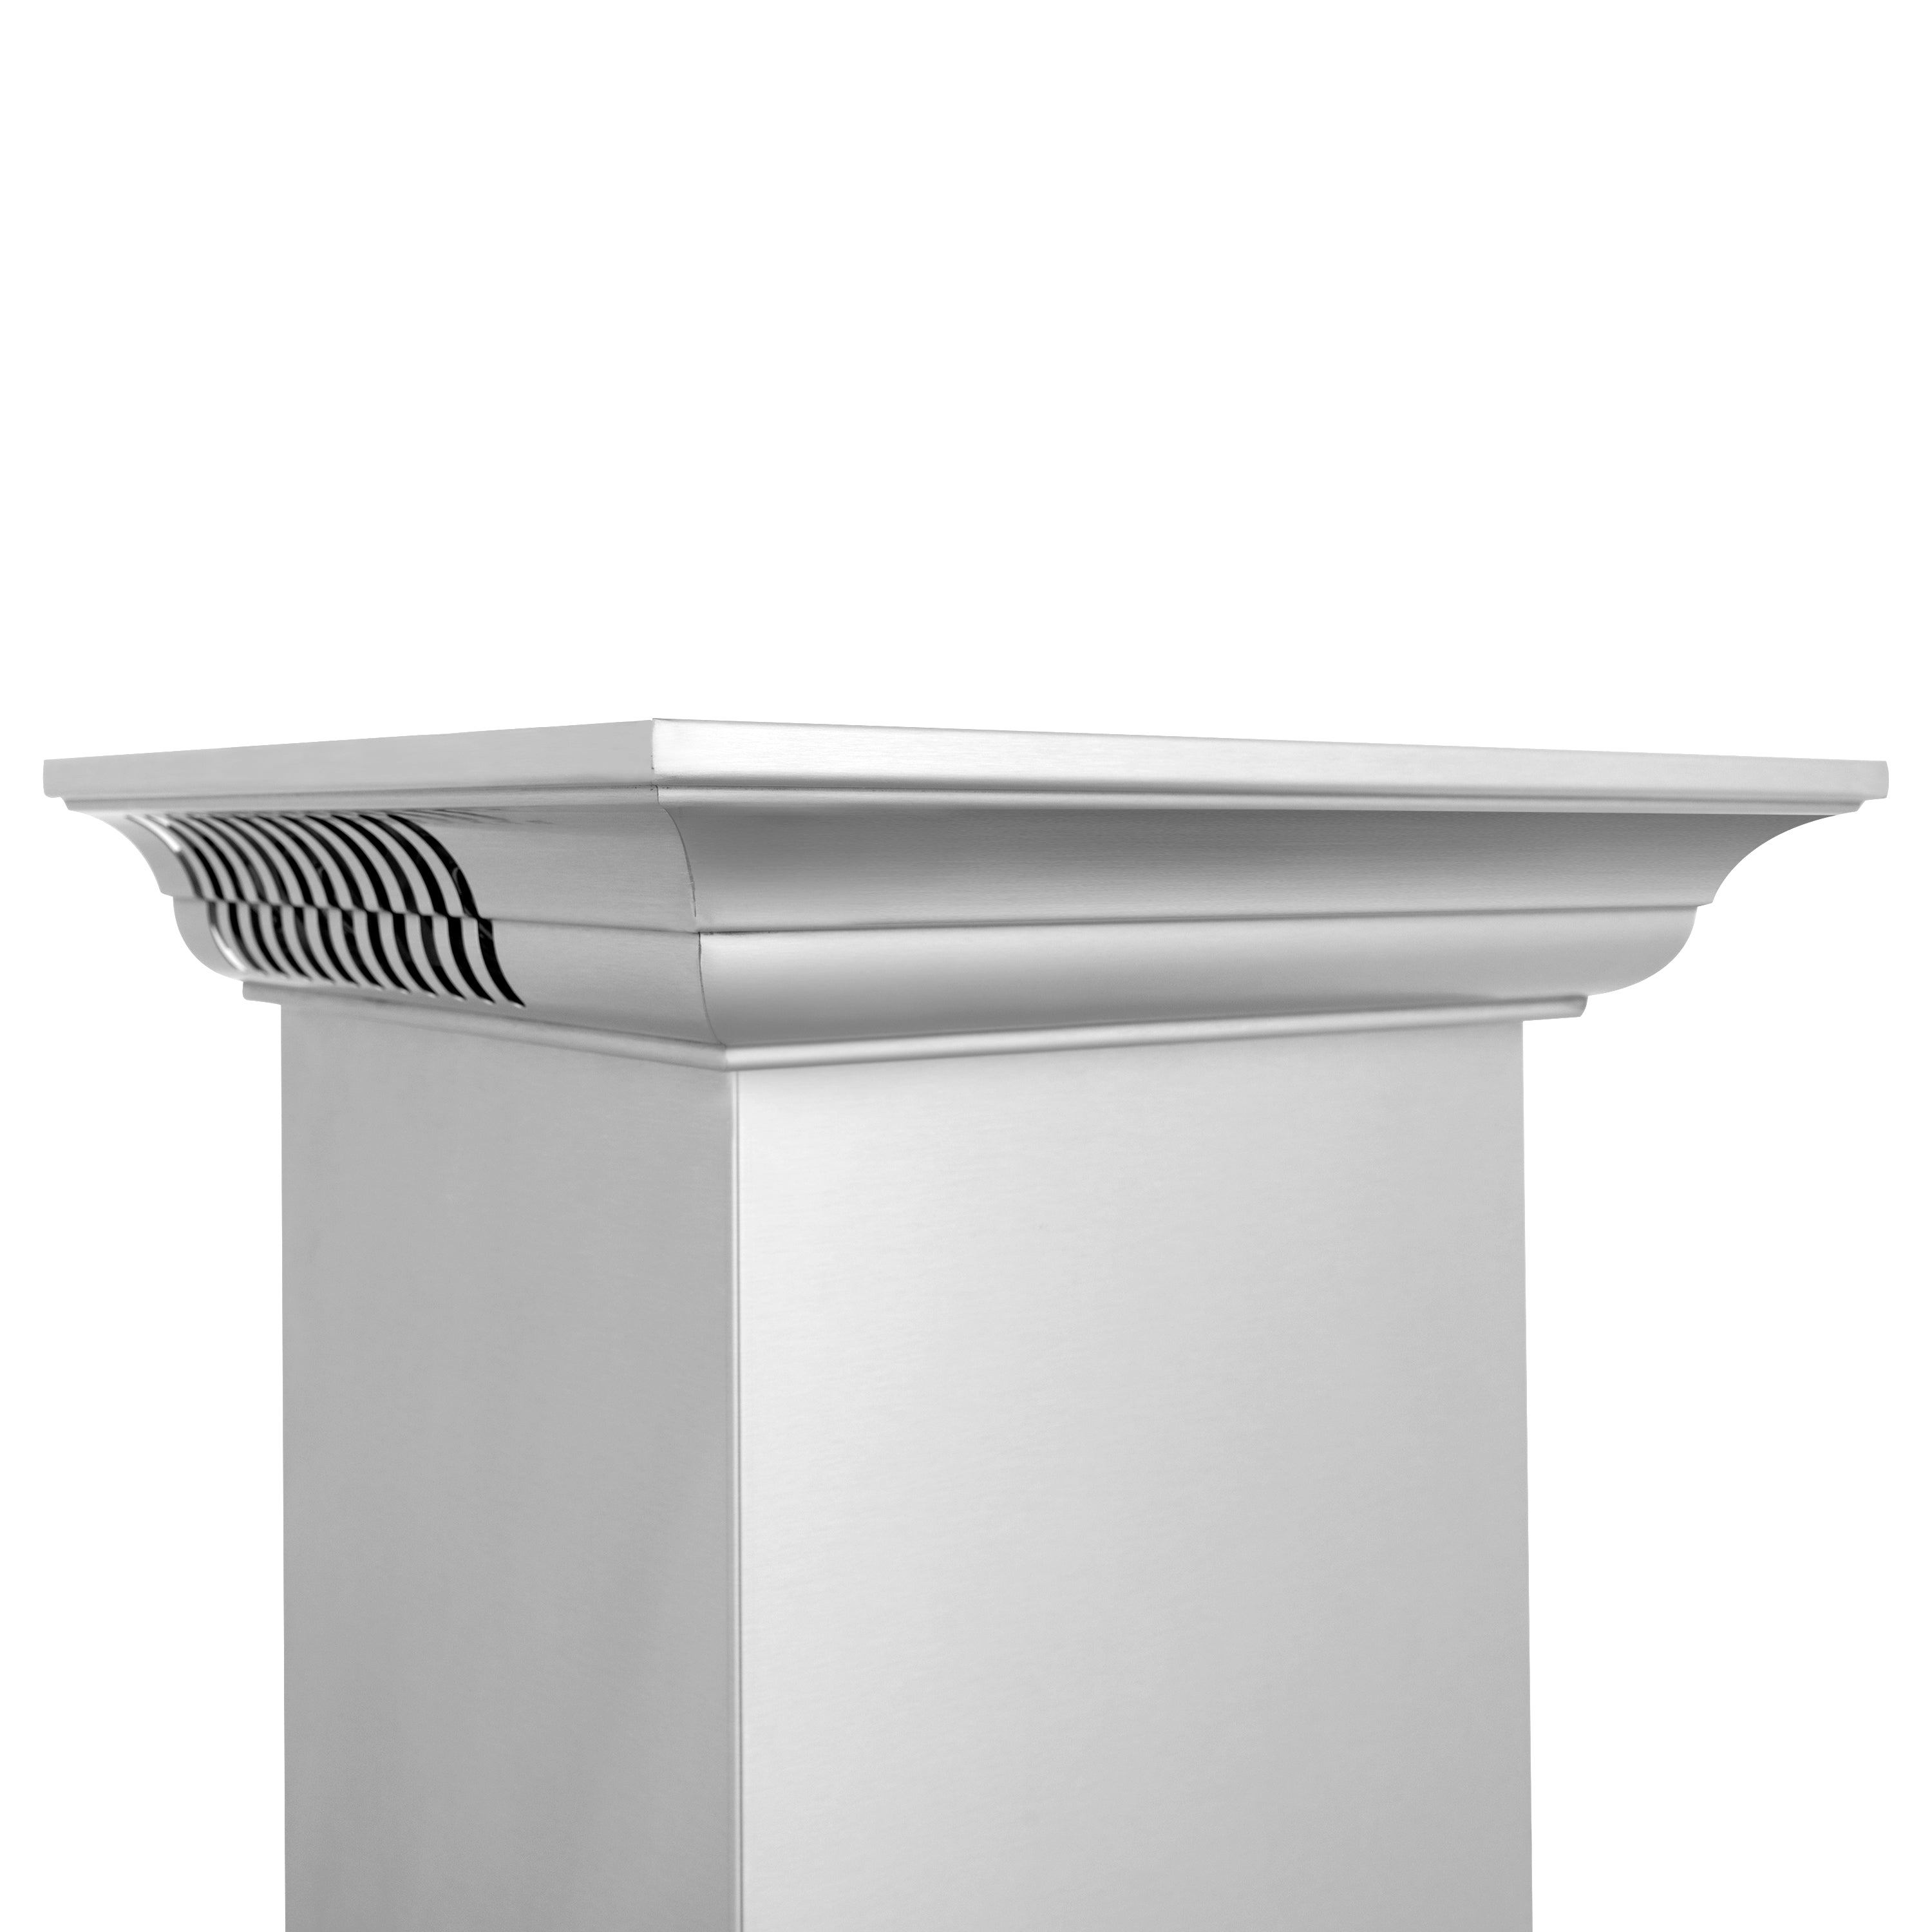 48" ZLINE CrownSound‚ Ducted Vent Wall Mount Range Hood in Stainless Steel with Built-in Bluetooth Speakers (KL2CRN-BT-48)